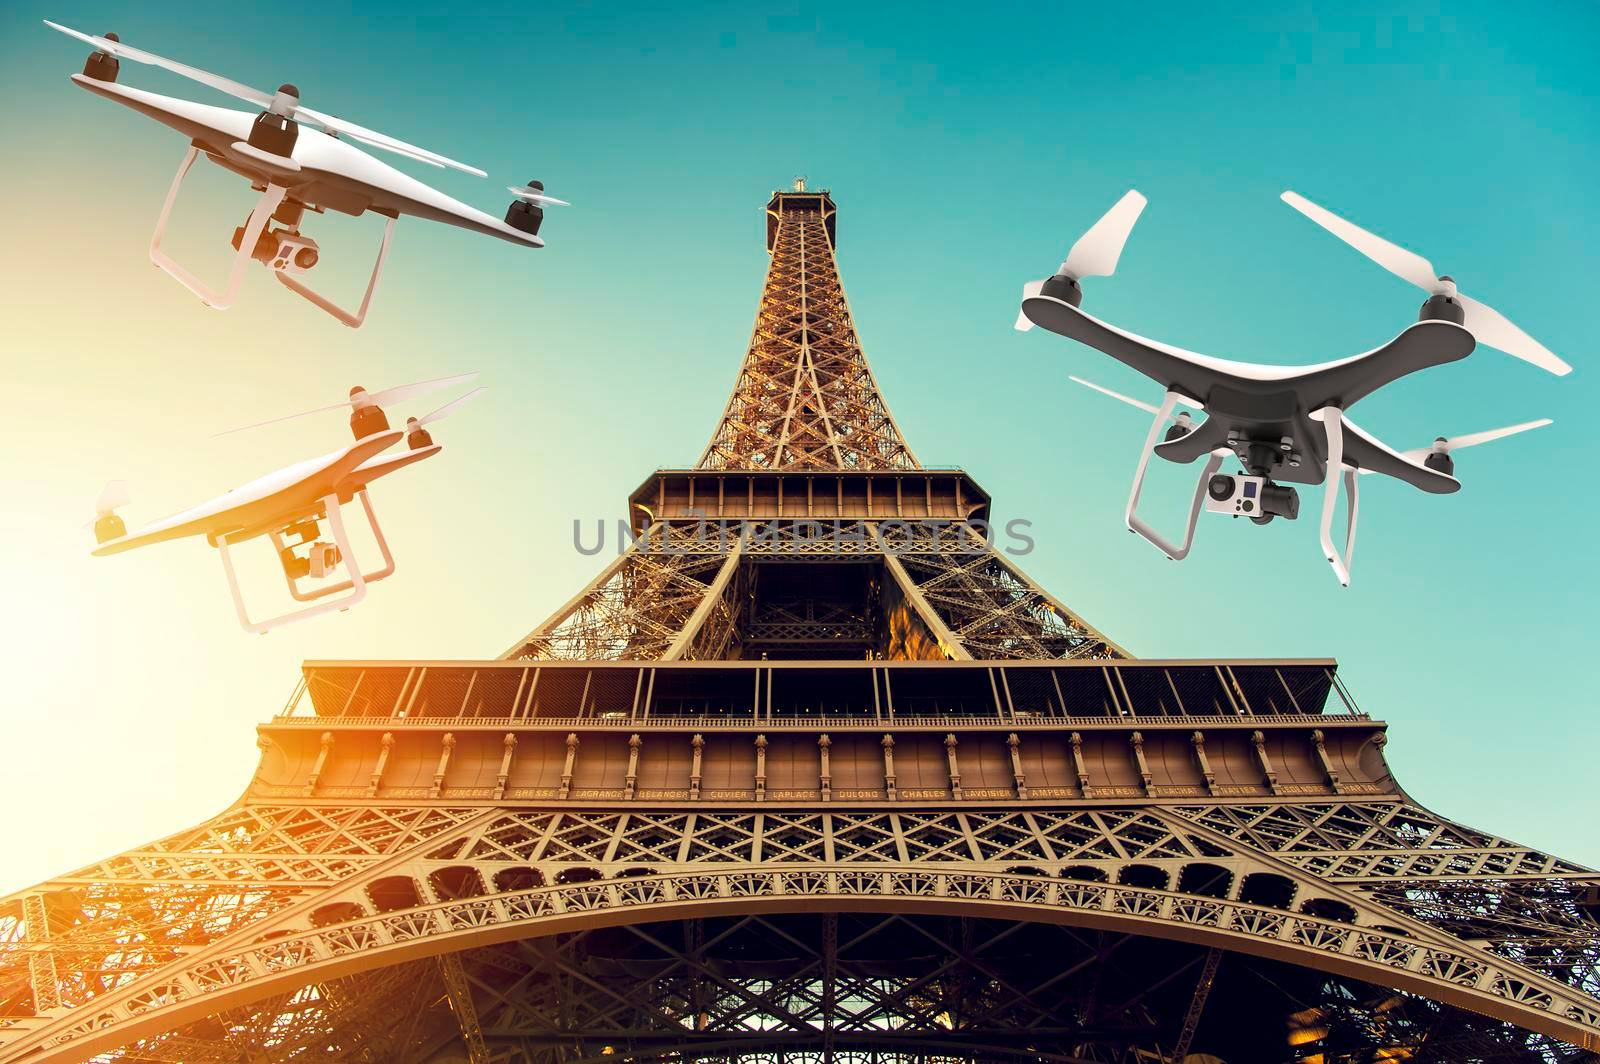 Many drones with digital camera flying around Tour Eiffel: 3D rendering